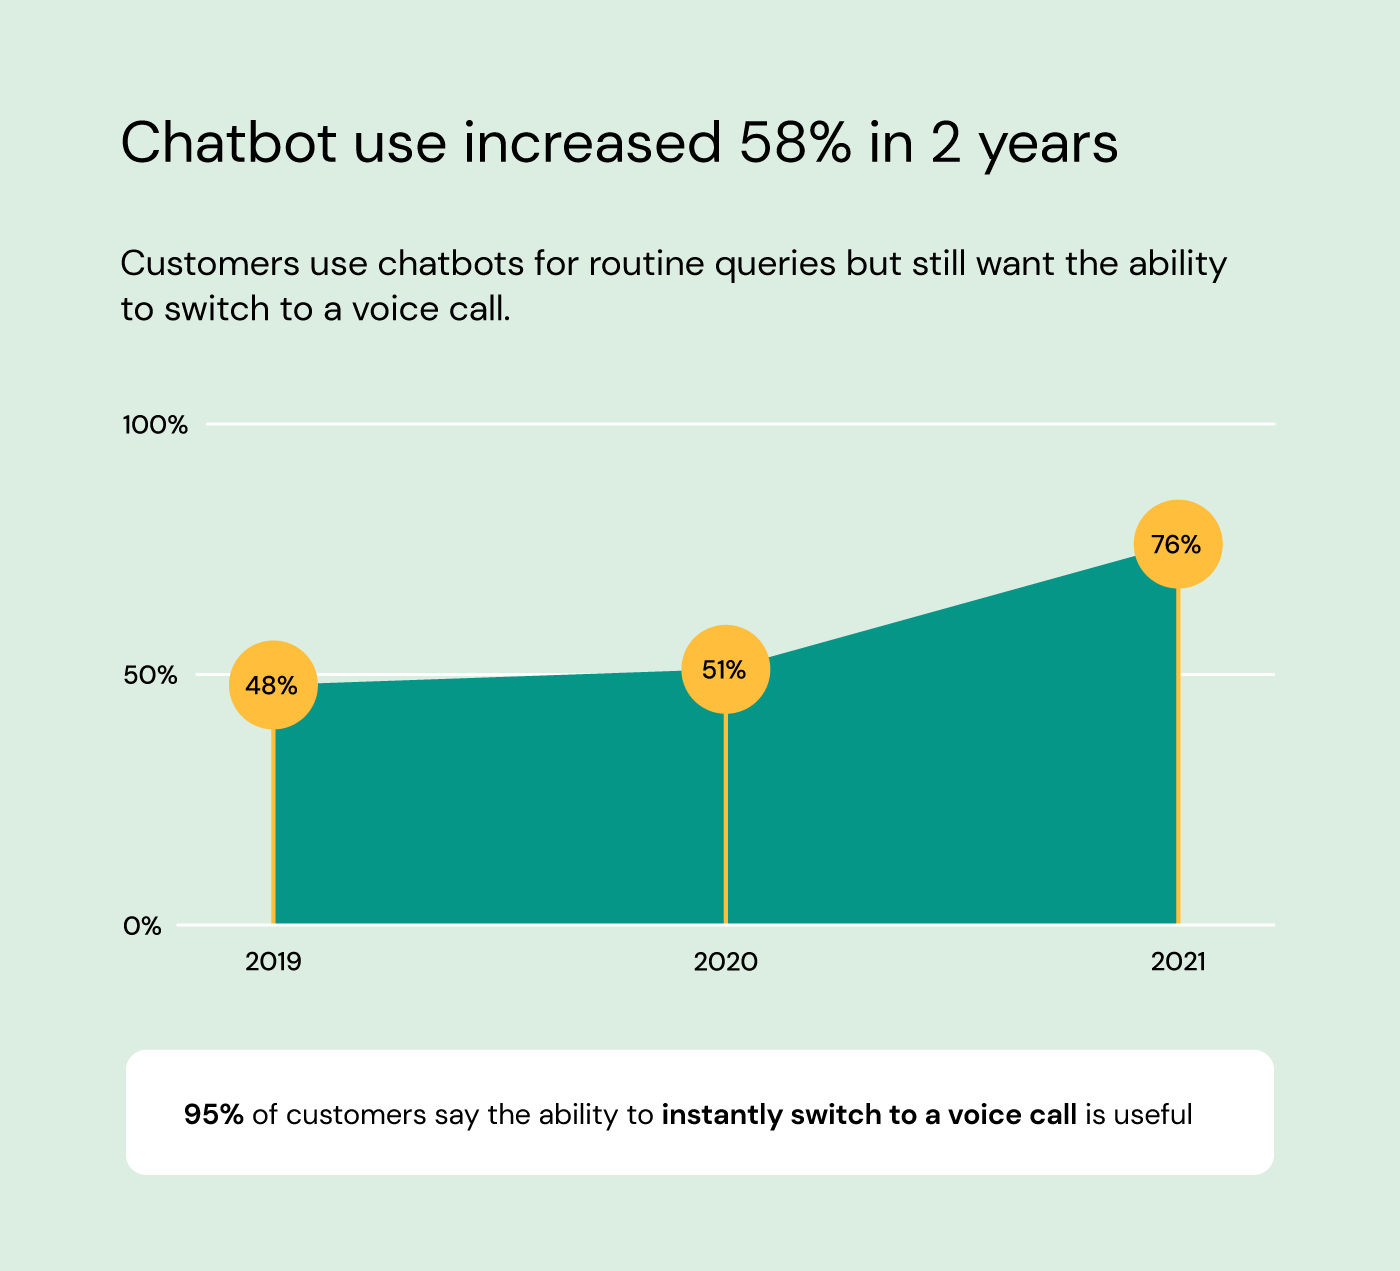 Chart shows that chatbox use increased 58% from 48% to 76% between 2019 and 2021.